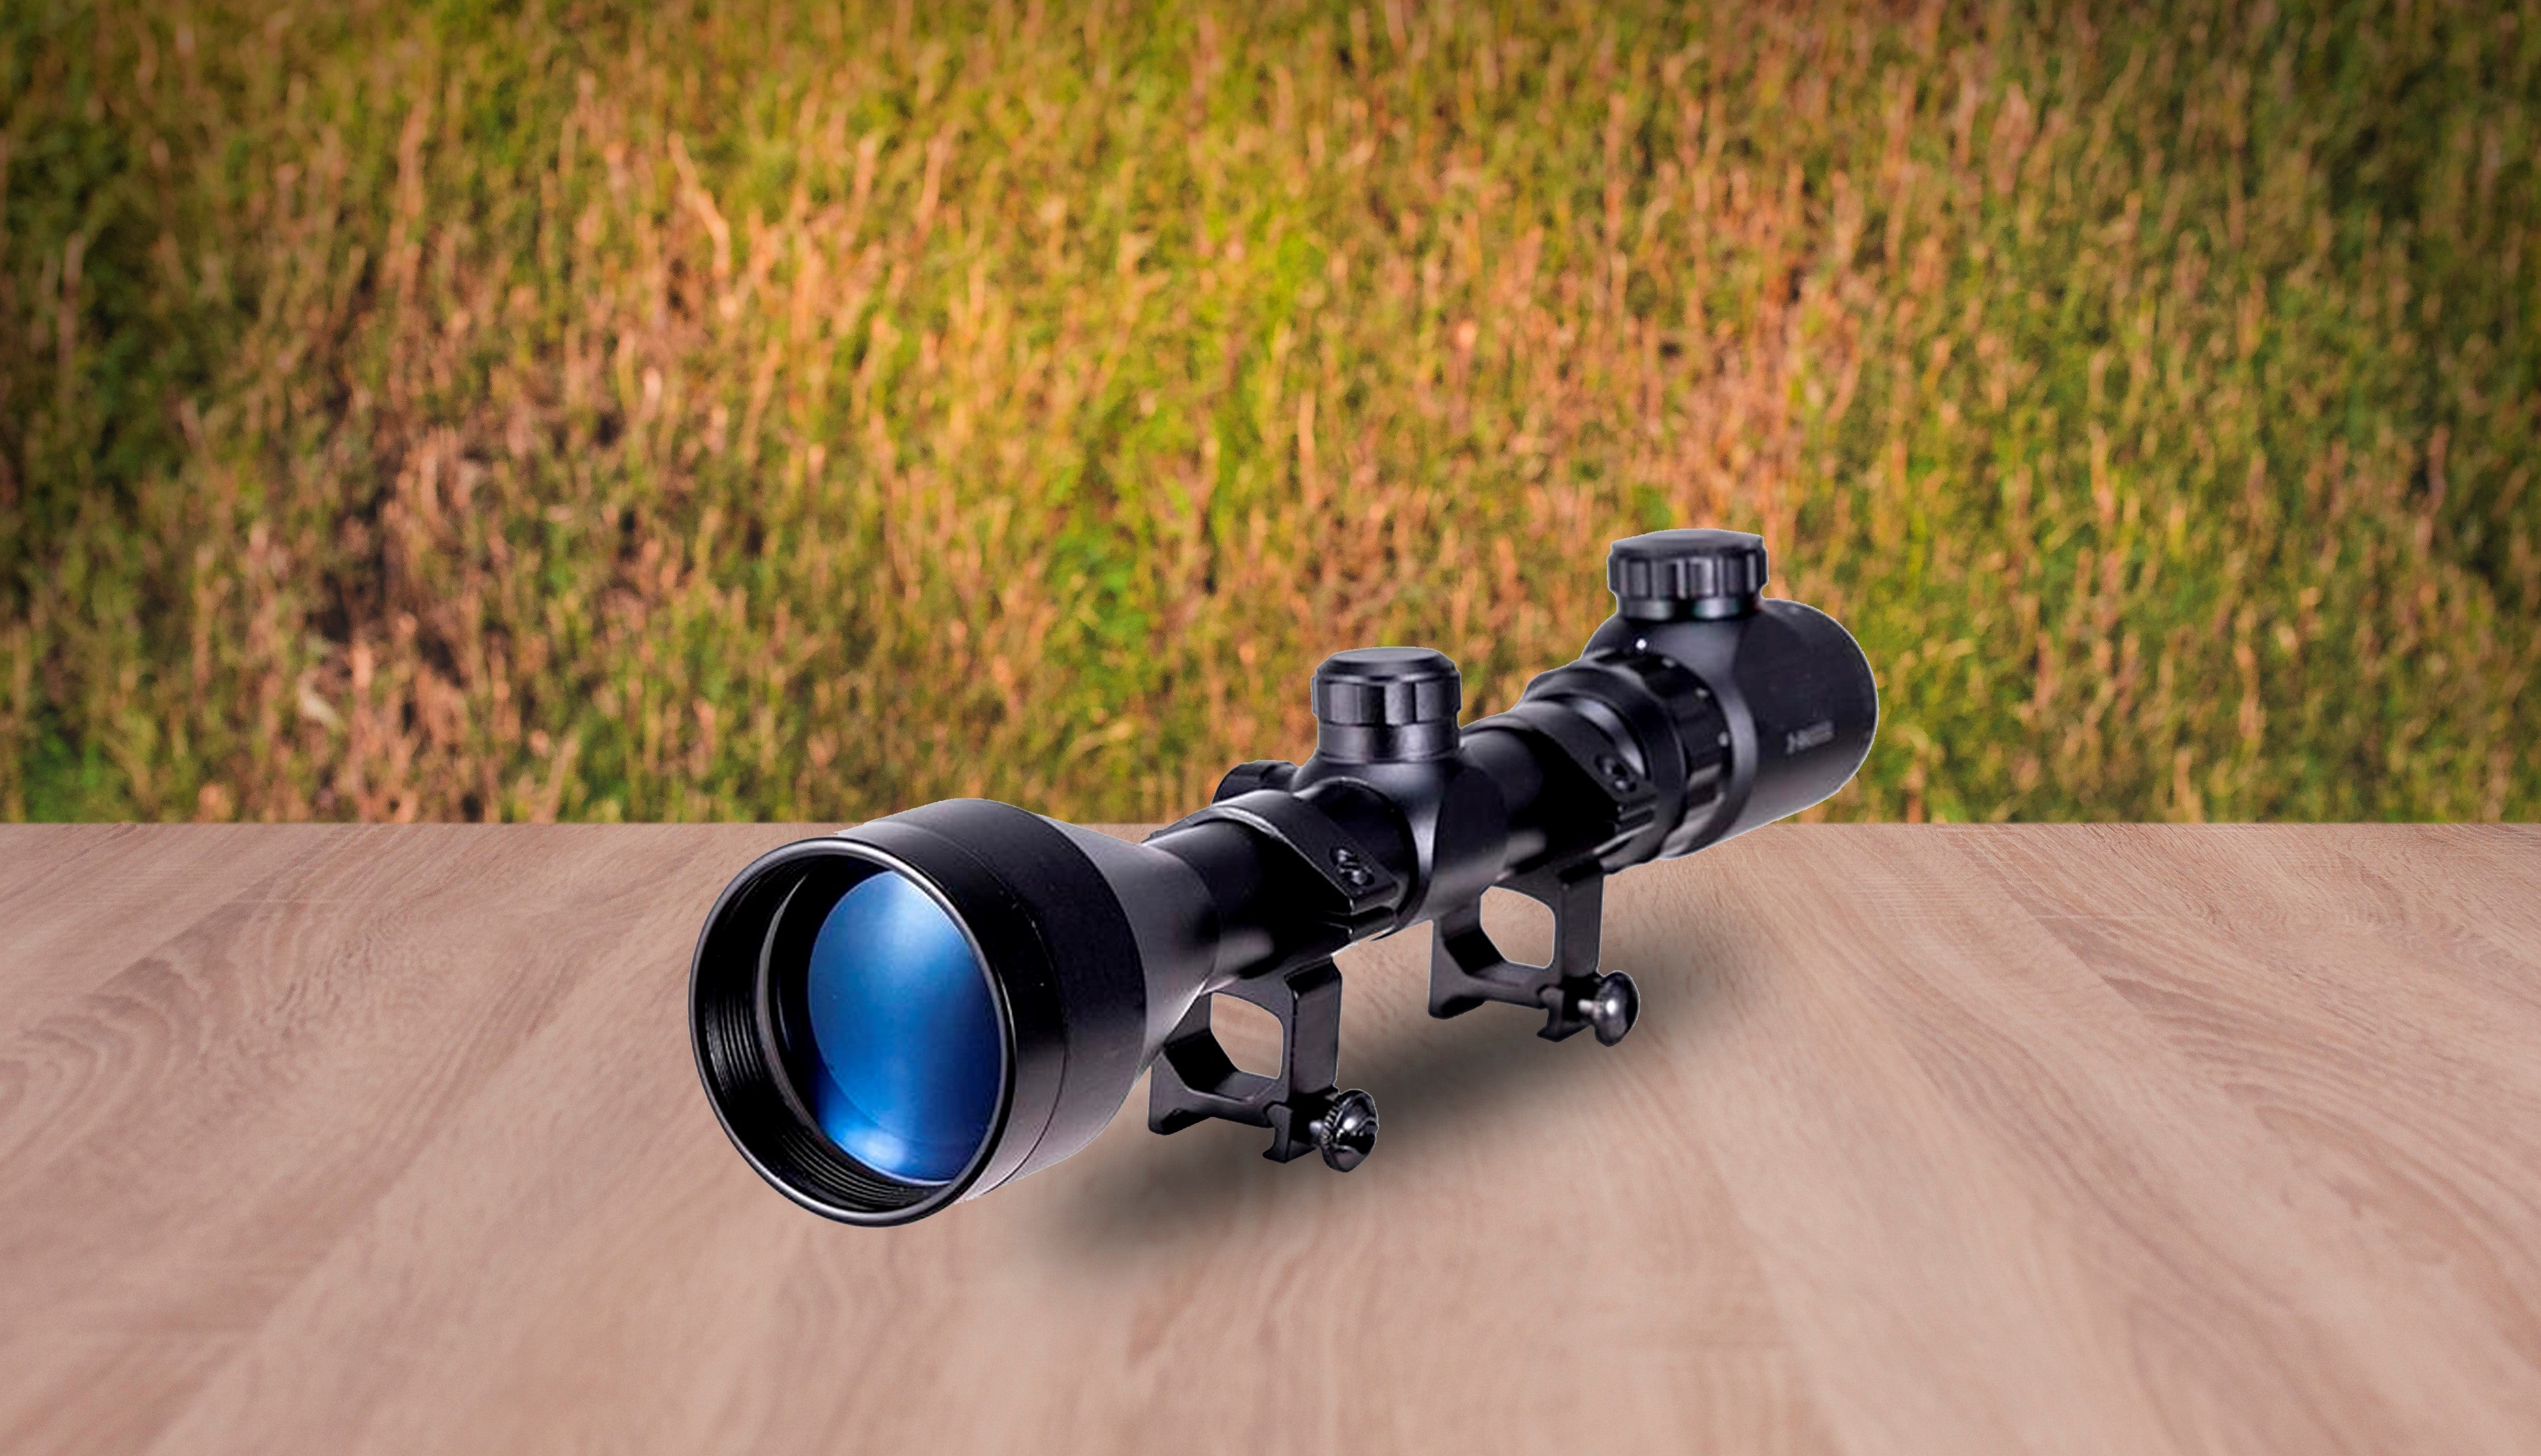 Riflescope for less than $200